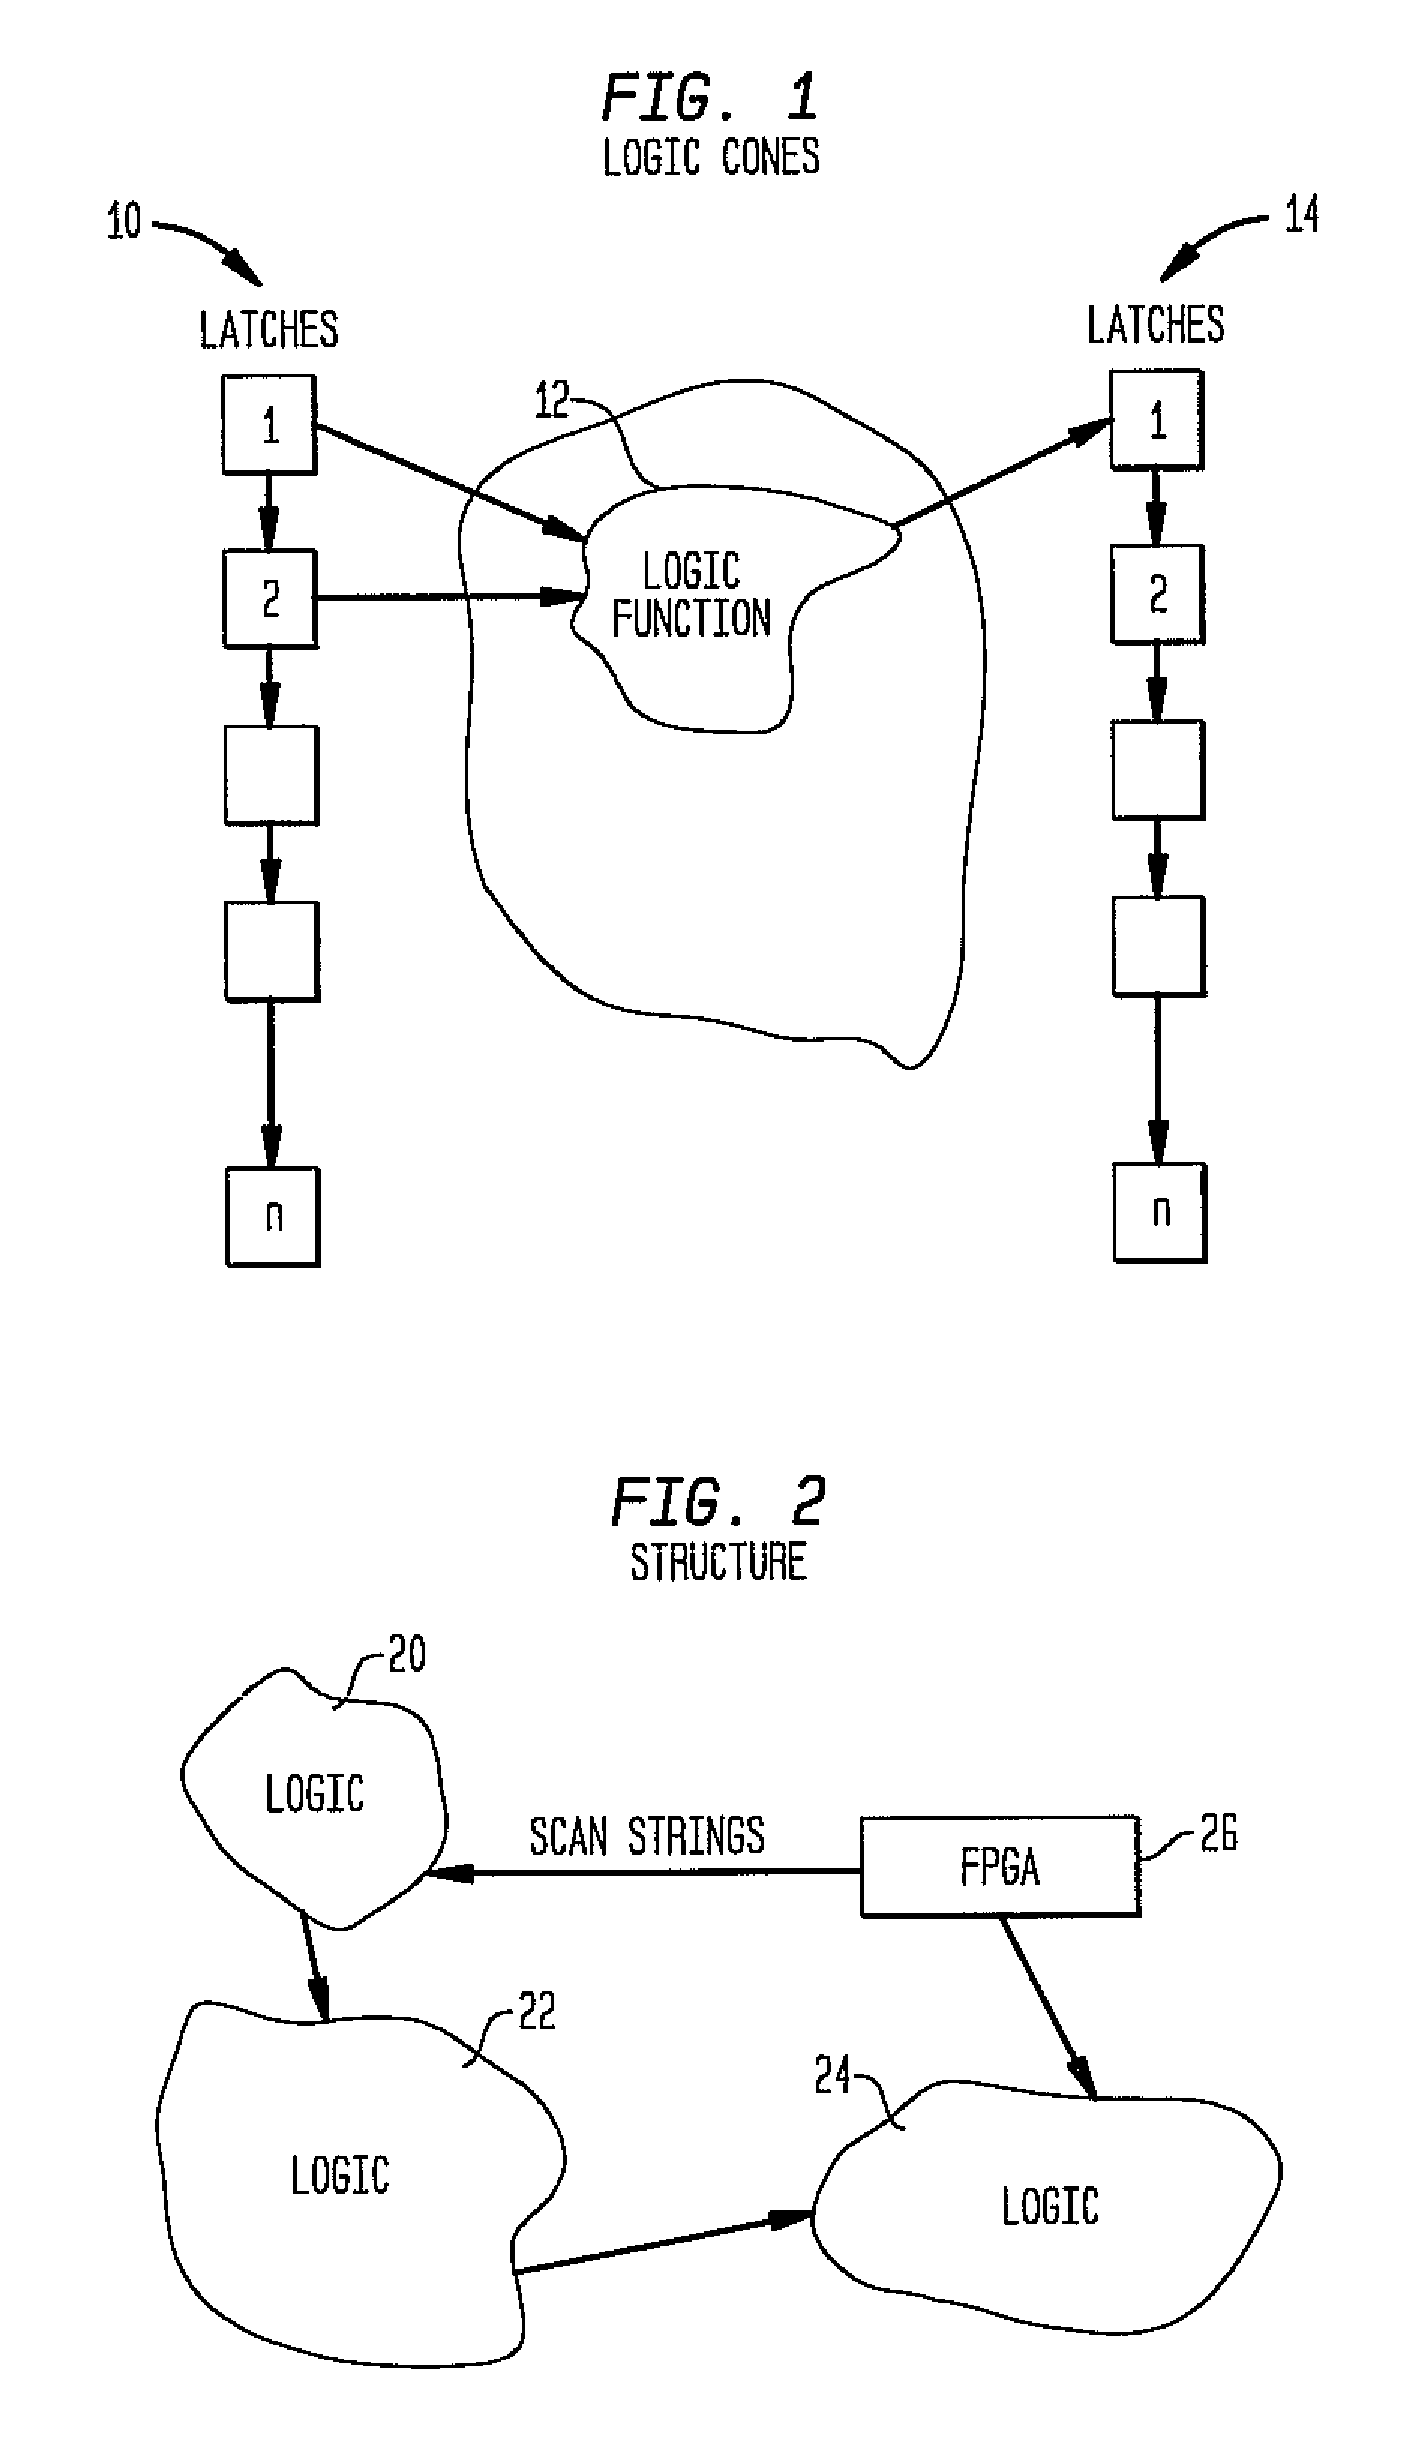 System and method of providing error detection and correction capability in an integrated circuit using redundant logic cells of an embedded FPGA